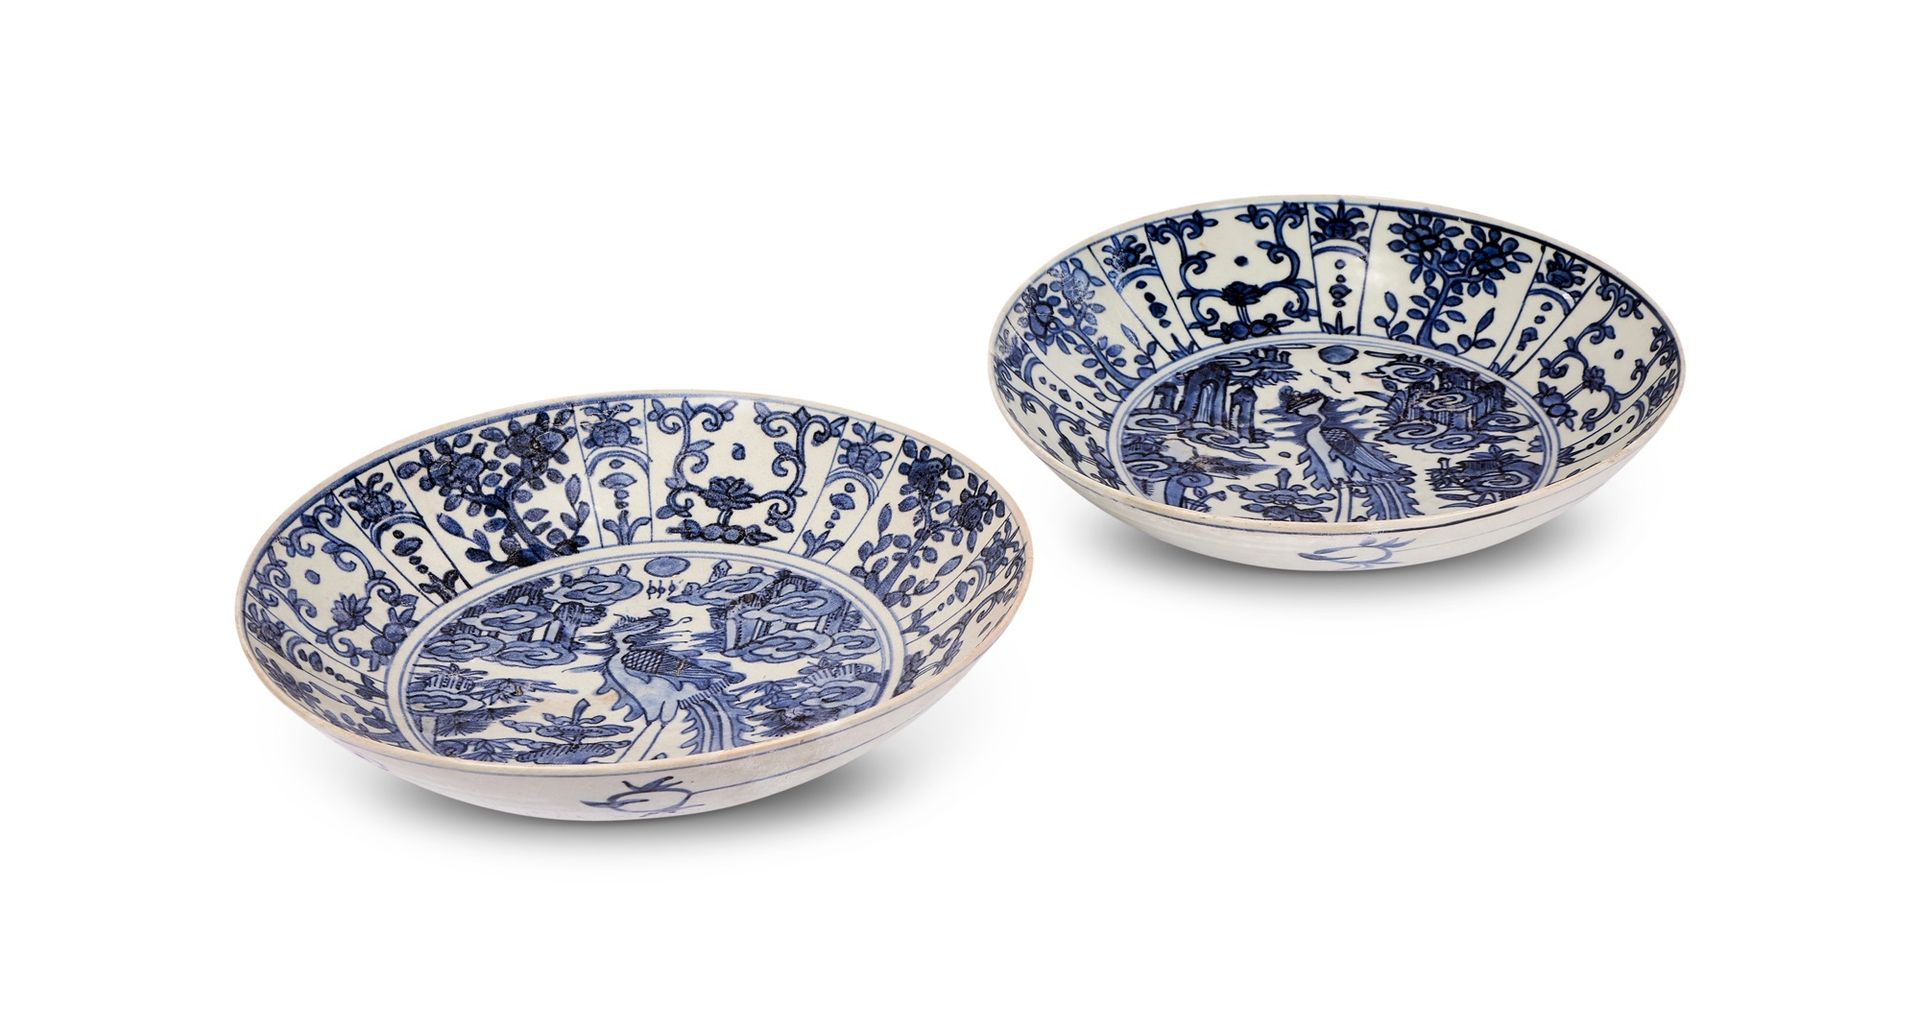 MING DYNASTY: A PAIR OF CHINESE KRAAK PORCELAIN DISHES (1573-1620) DYNASTIE MING&hellip;